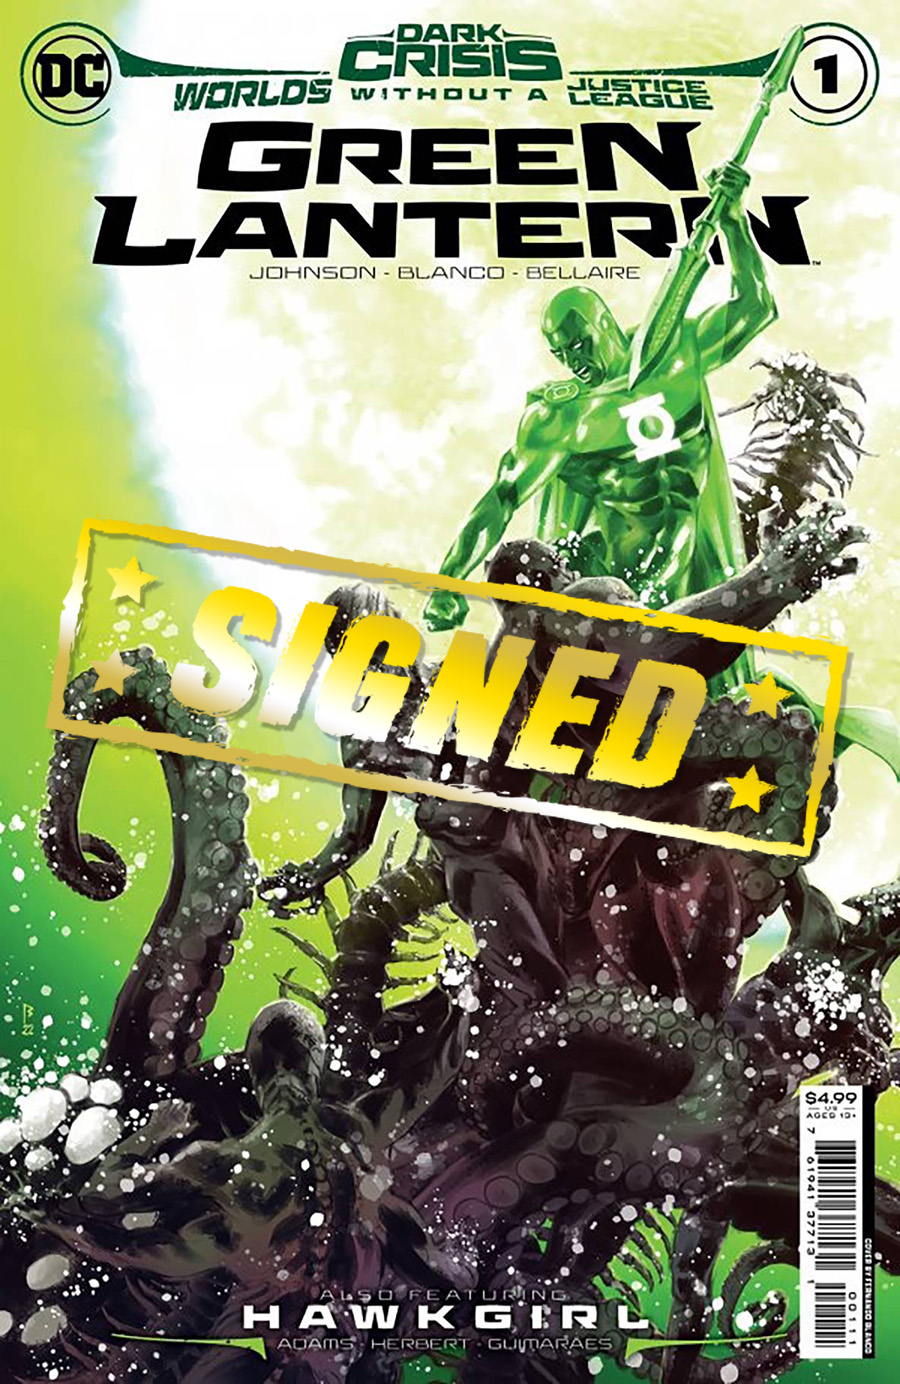 Dark Crisis Worlds Without A Justice League Green Lantern #1 (One Shot) Cover D DF Signed By Phillip Kennedy Johnson